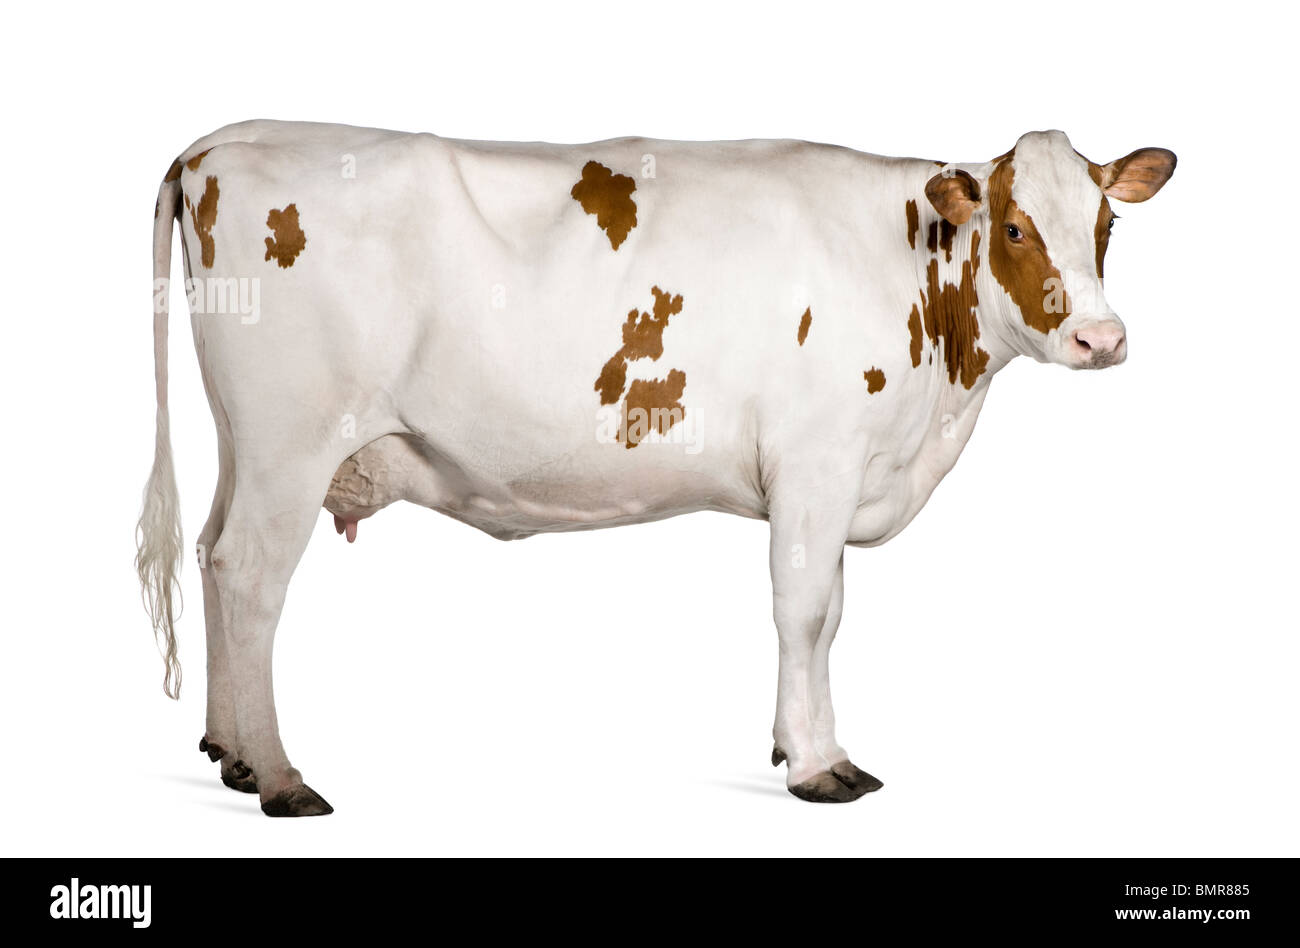 Holstein cow, 4 years old, standing against white background Stock Photo